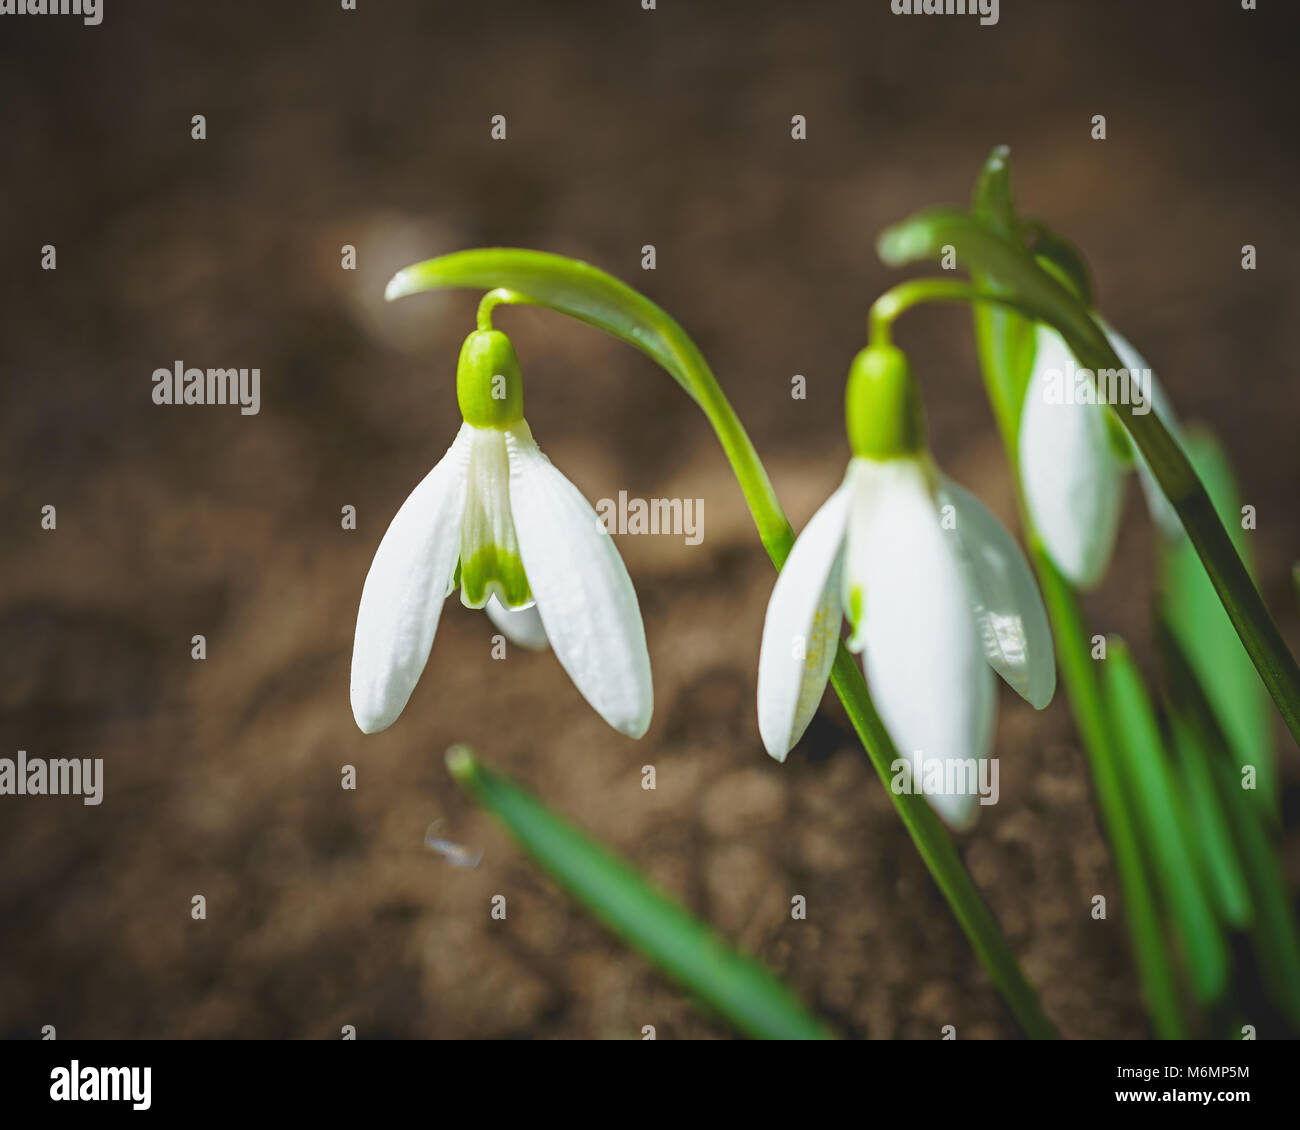 Snowdrops in the early spring garden. Stock Photo